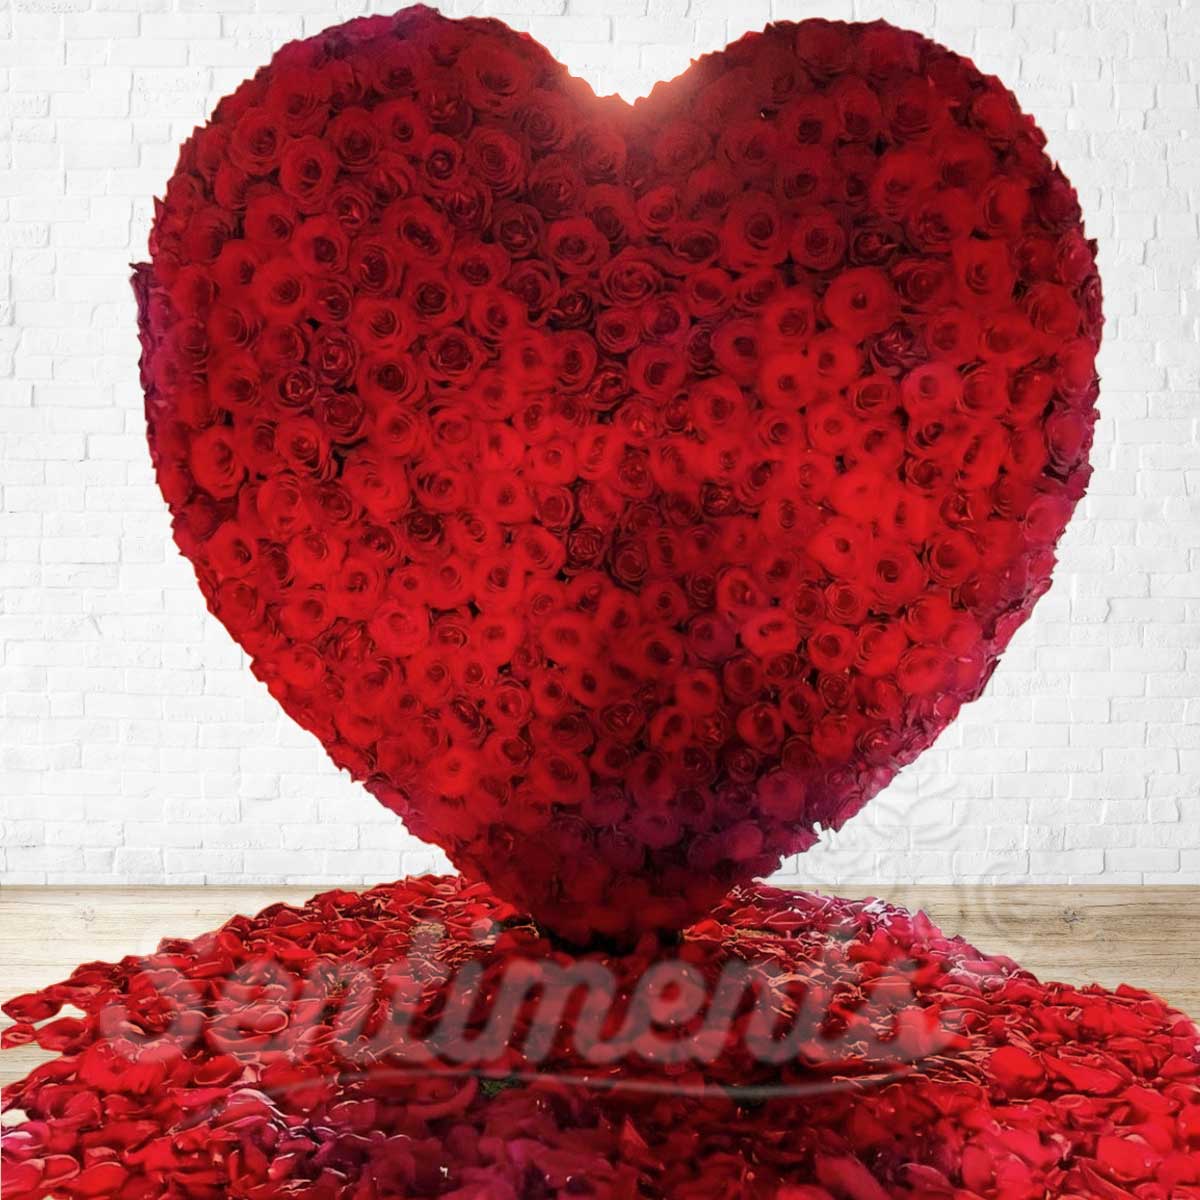 Deluxe Red Roses Heart Arrangement - PRE-ORDER 3days before Delivery - PRE-STANDING